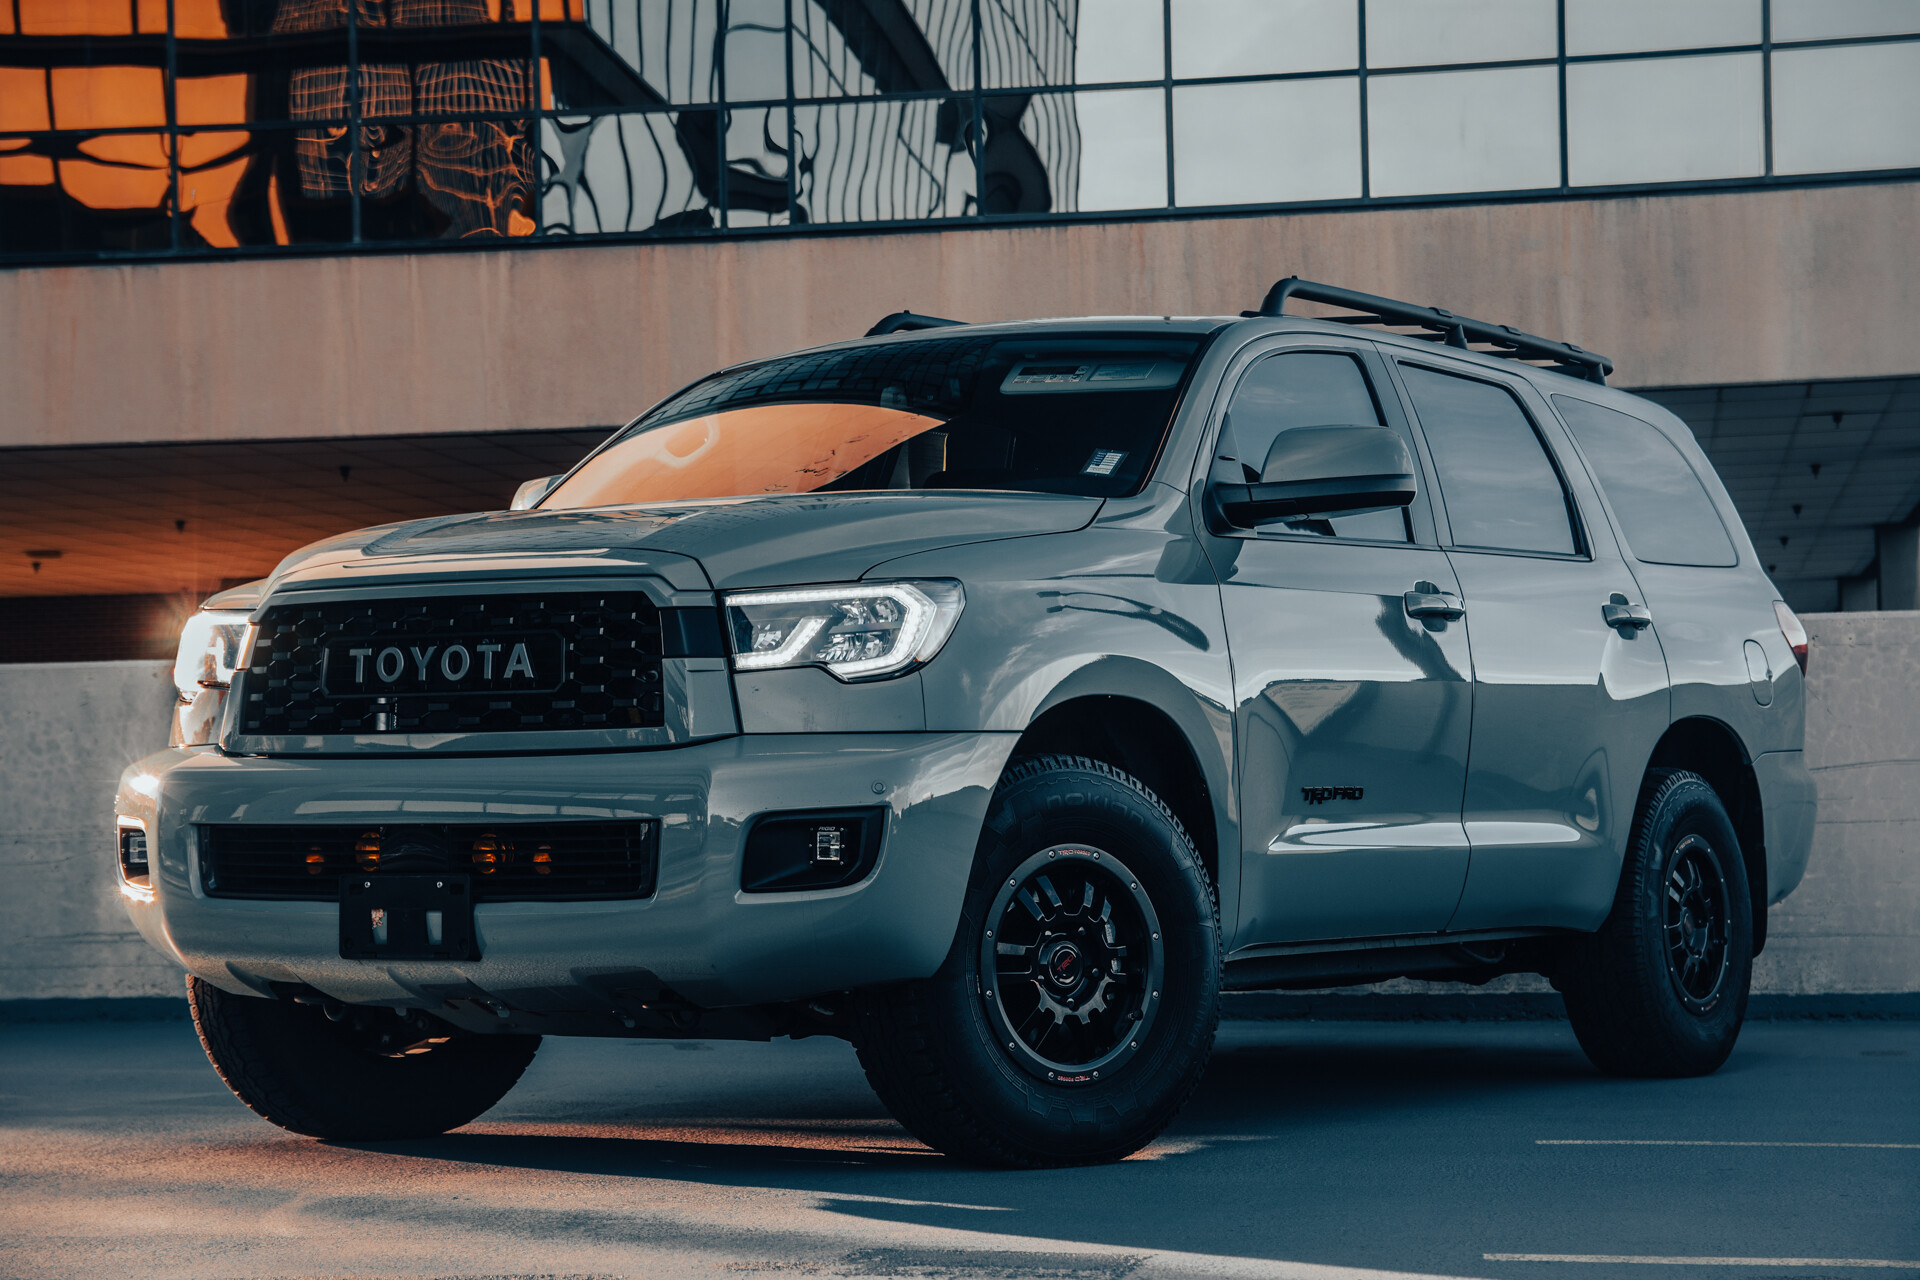 2021 Toyota Sequoia TRD Pro in Lunar Rock Front Driver’s 3/4 View